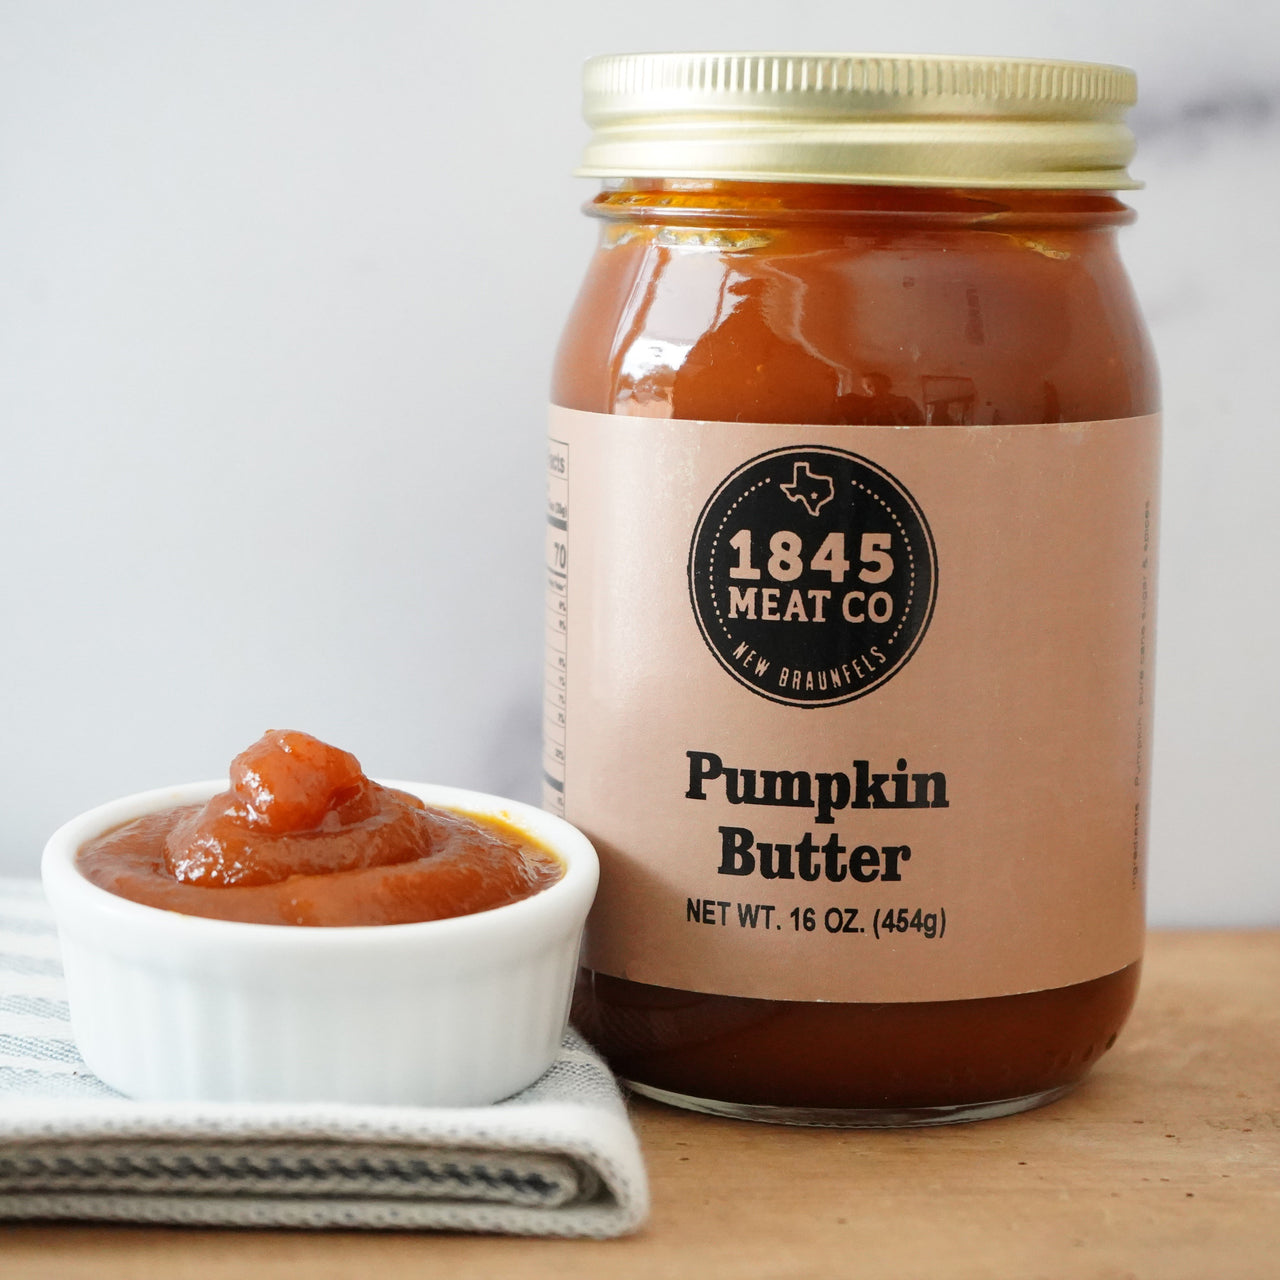 ﻿A hint of pumpkin that makes breakfast or a quick snack even better!